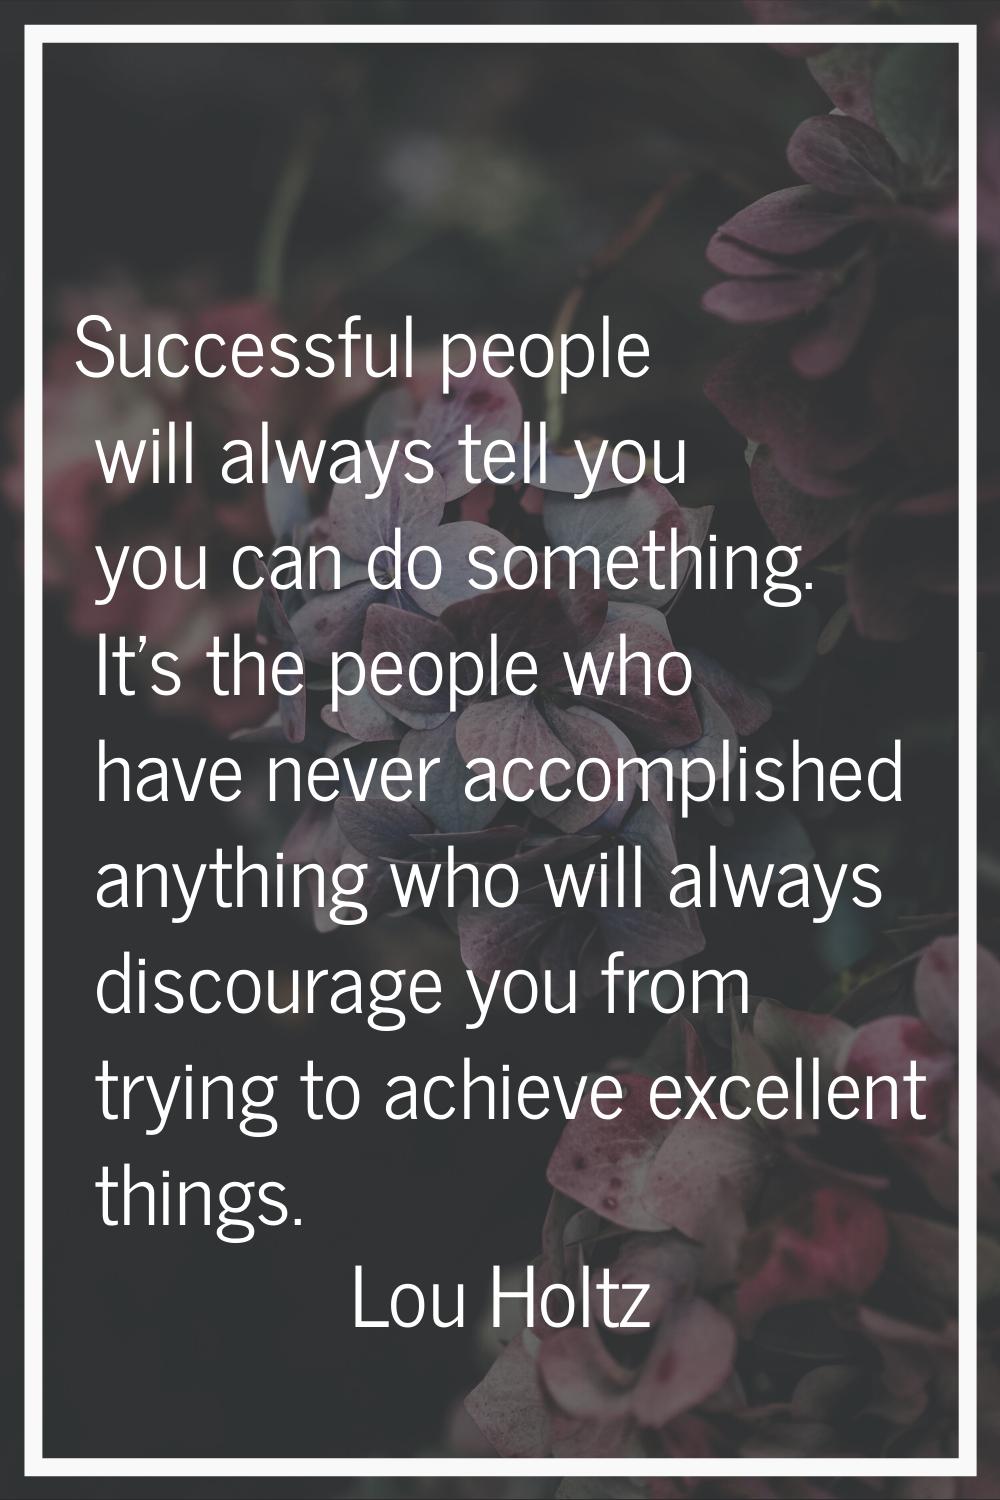 Successful people will always tell you you can do something. It's the people who have never accompl